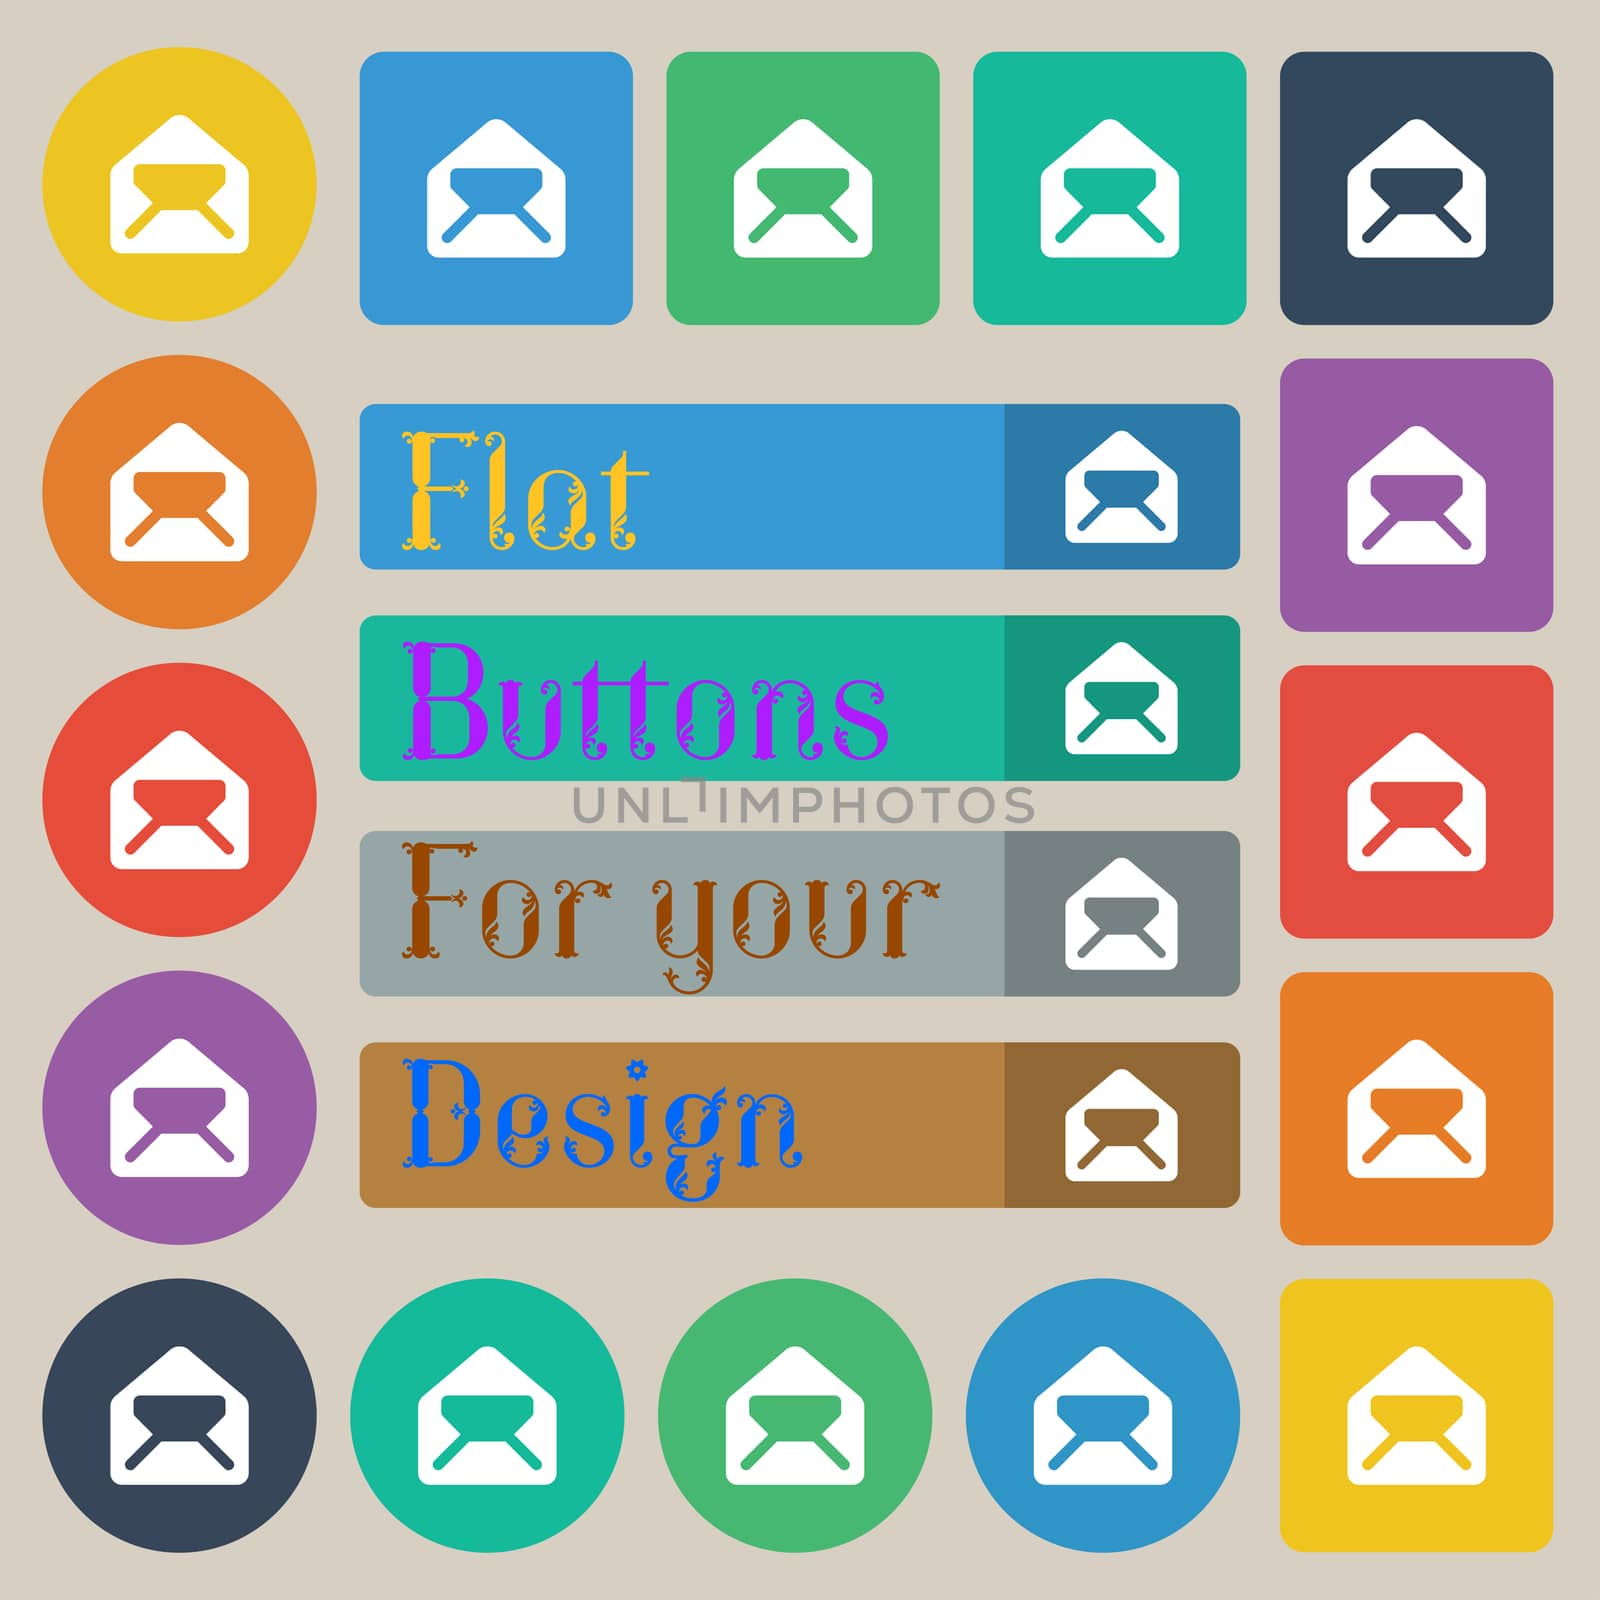 Mail, envelope, letter icon sign. Set of twenty colored flat, round, square and rectangular buttons. illustration